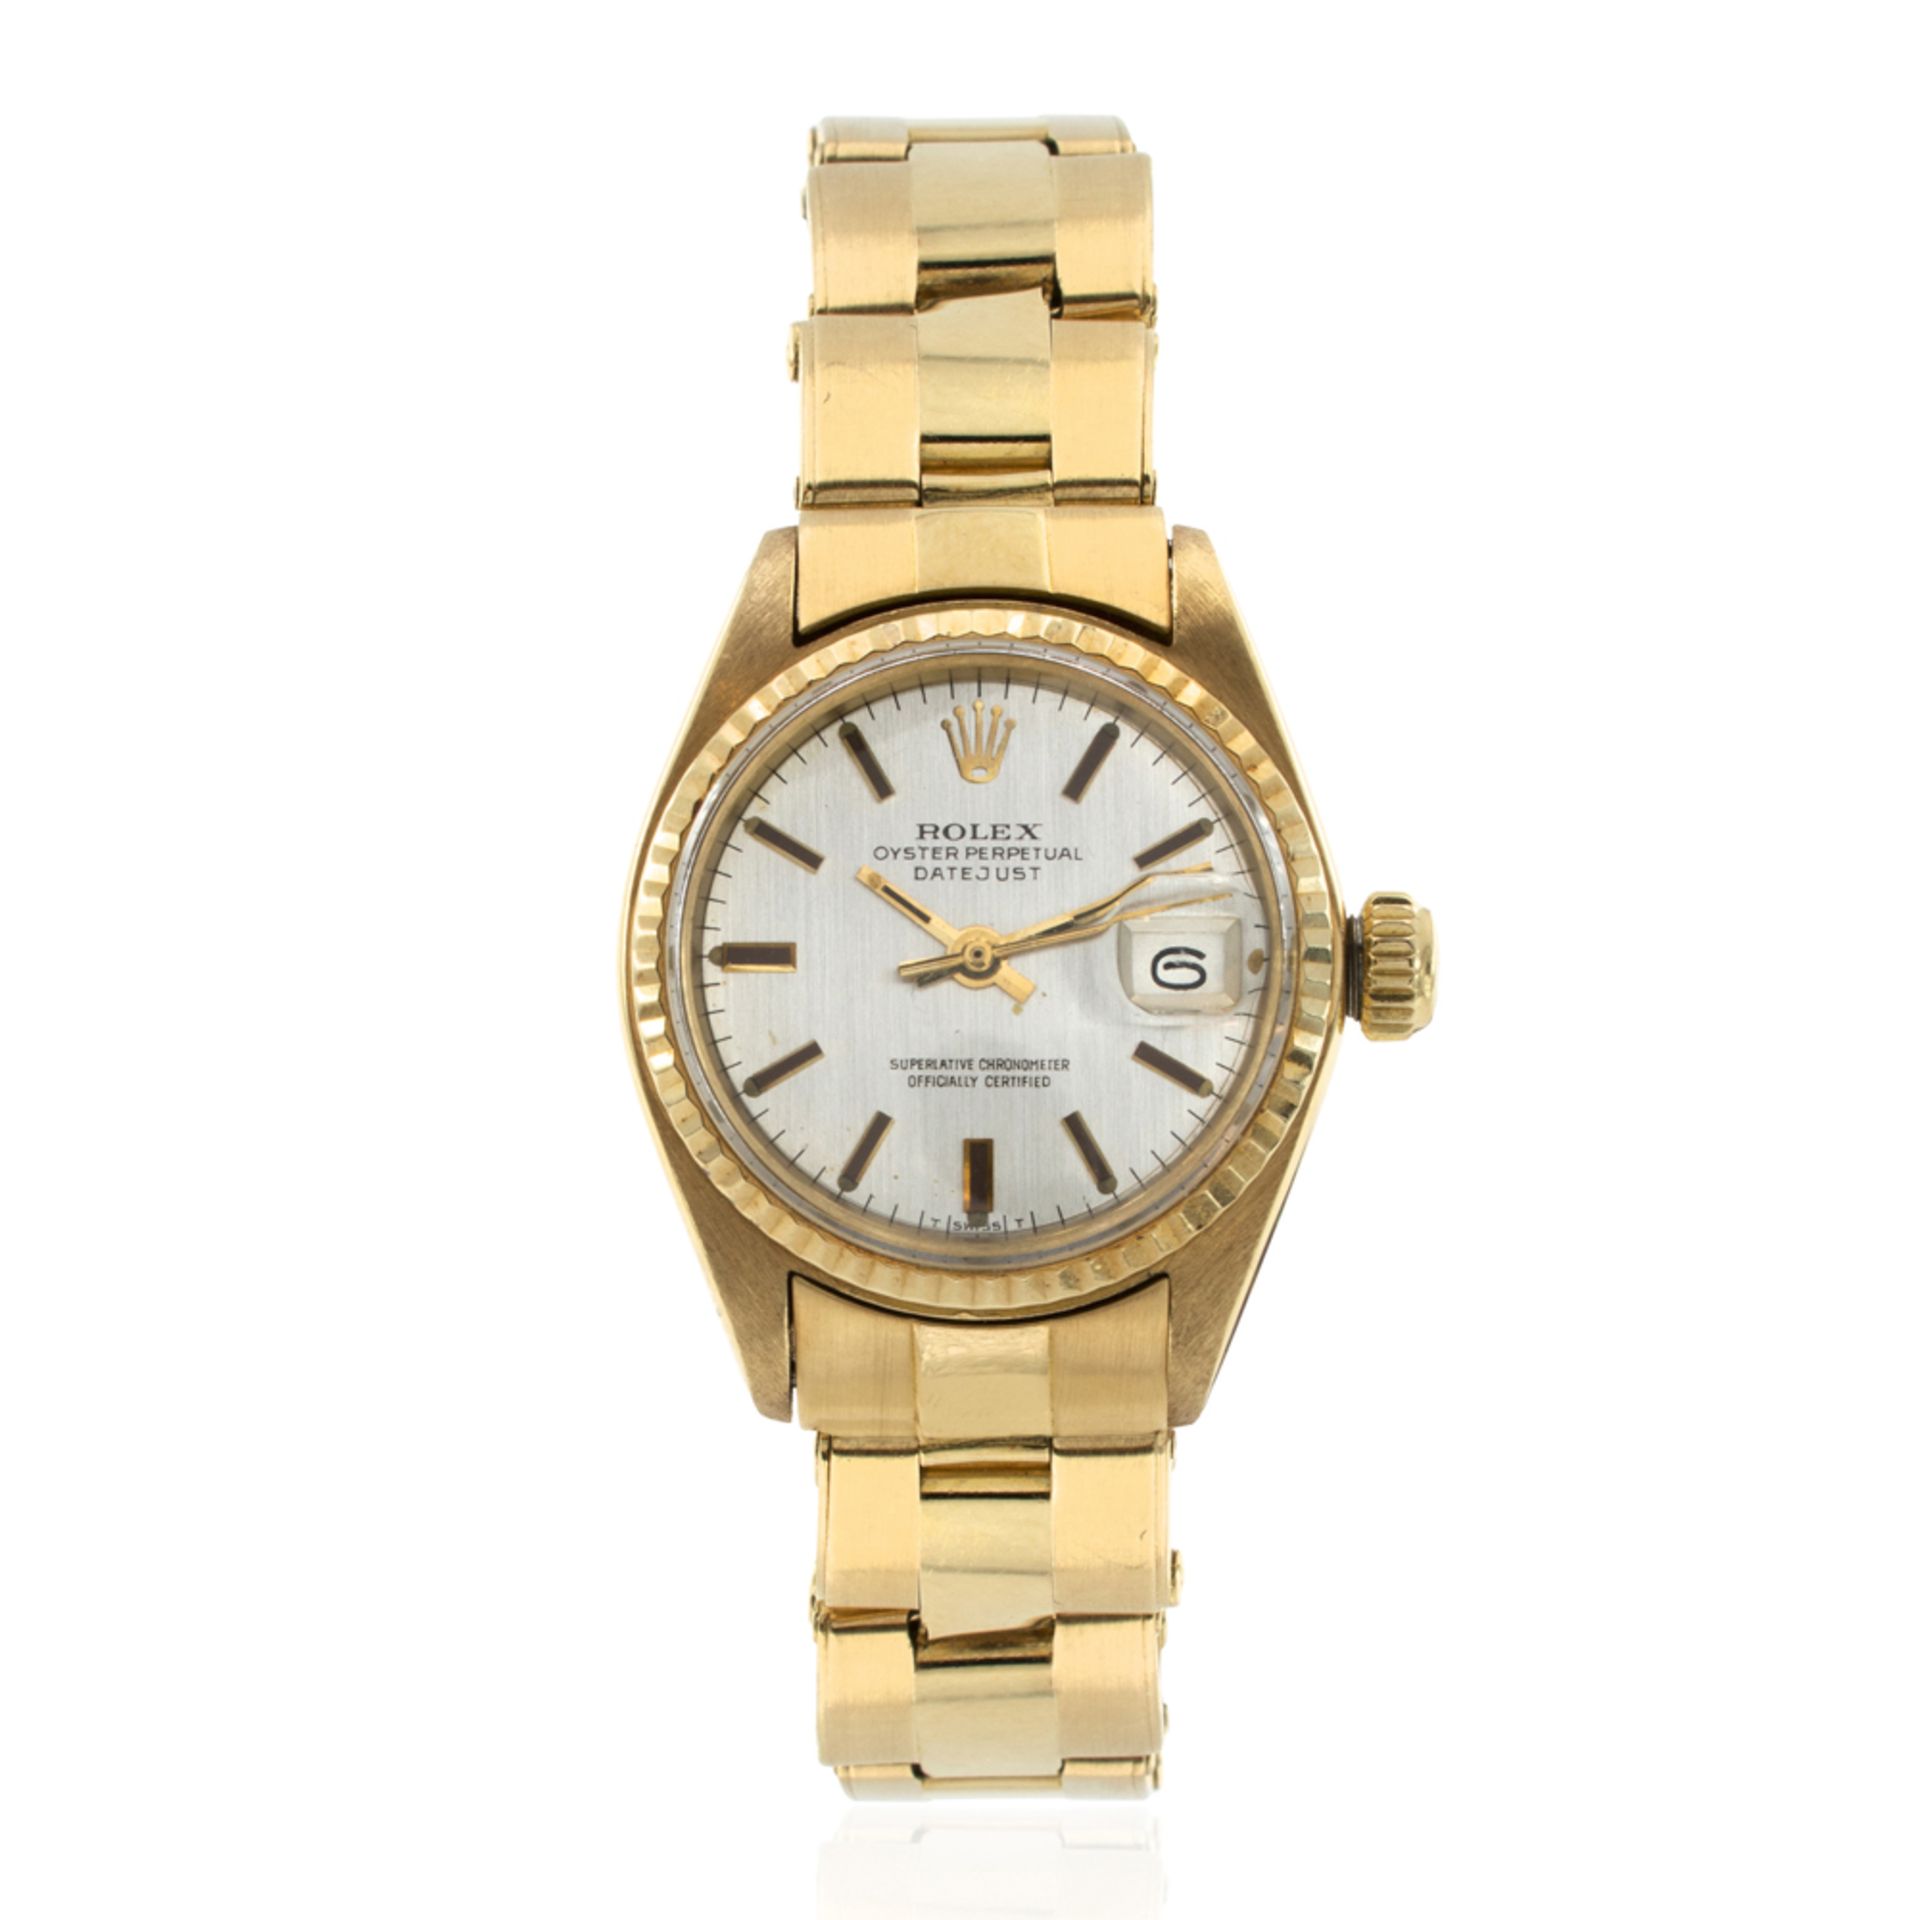 Rolex Oyster Perpetual Datejust, ladies vintage watch